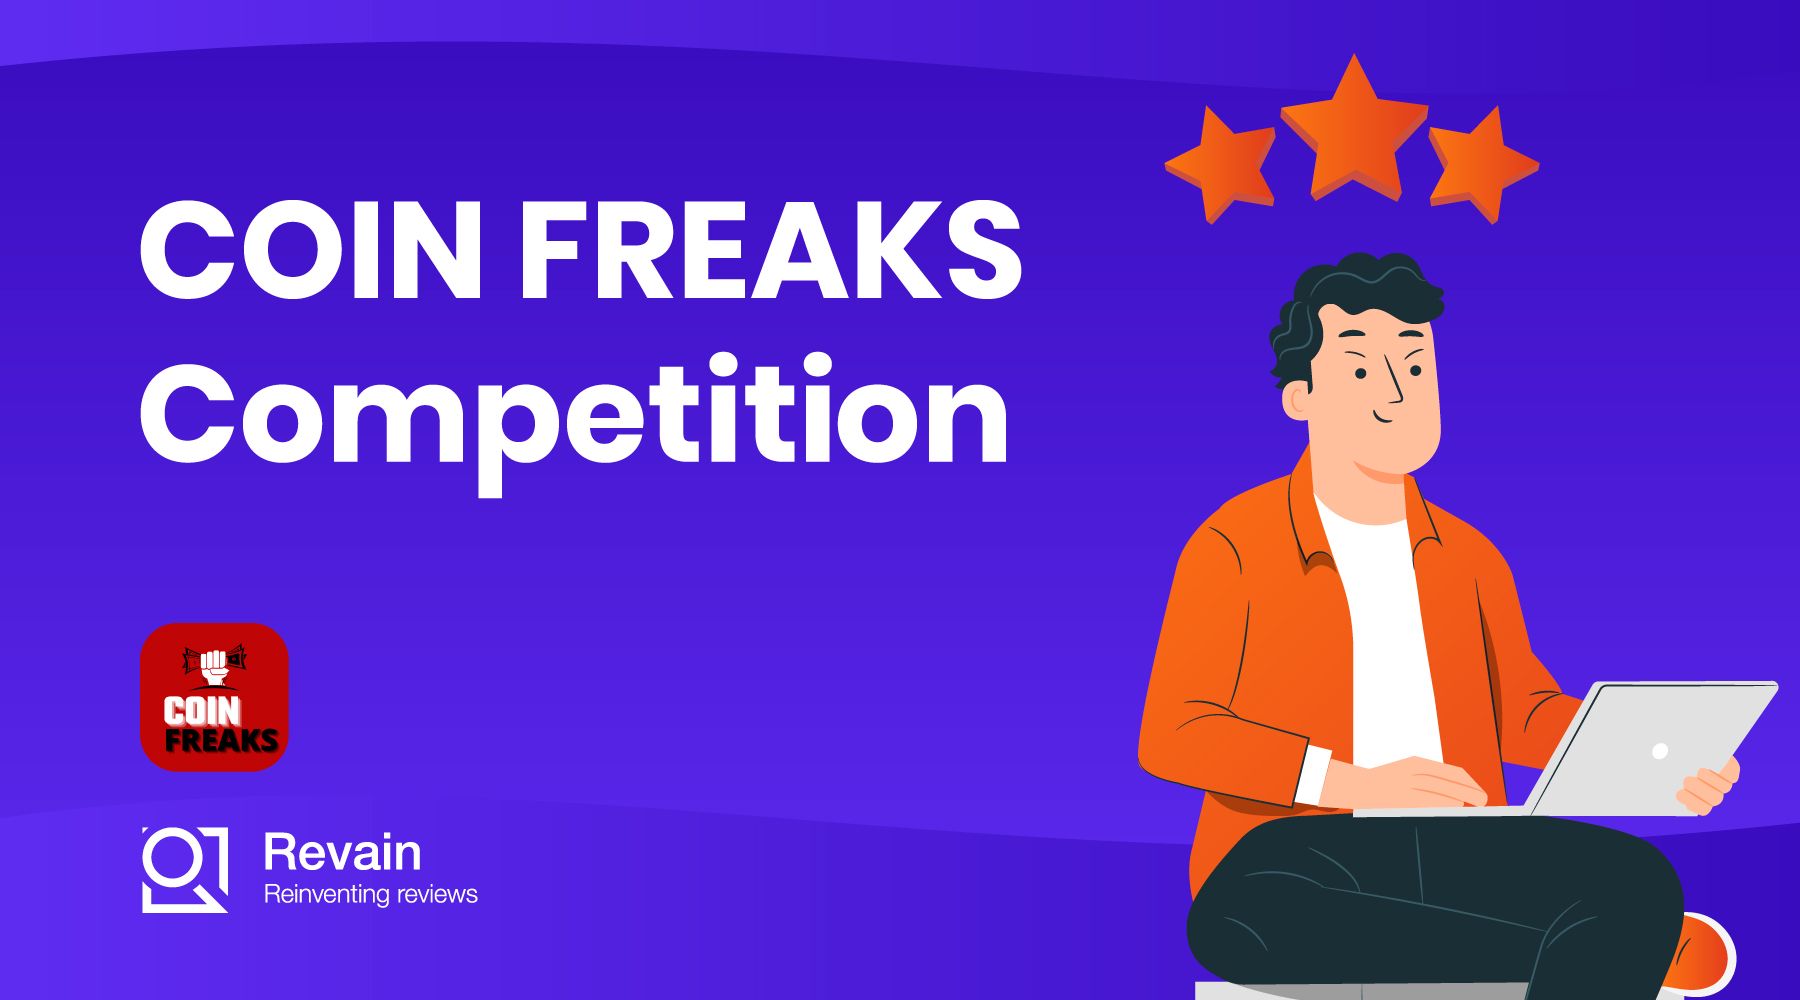 Revain and Coin Freaks review competition has already started!